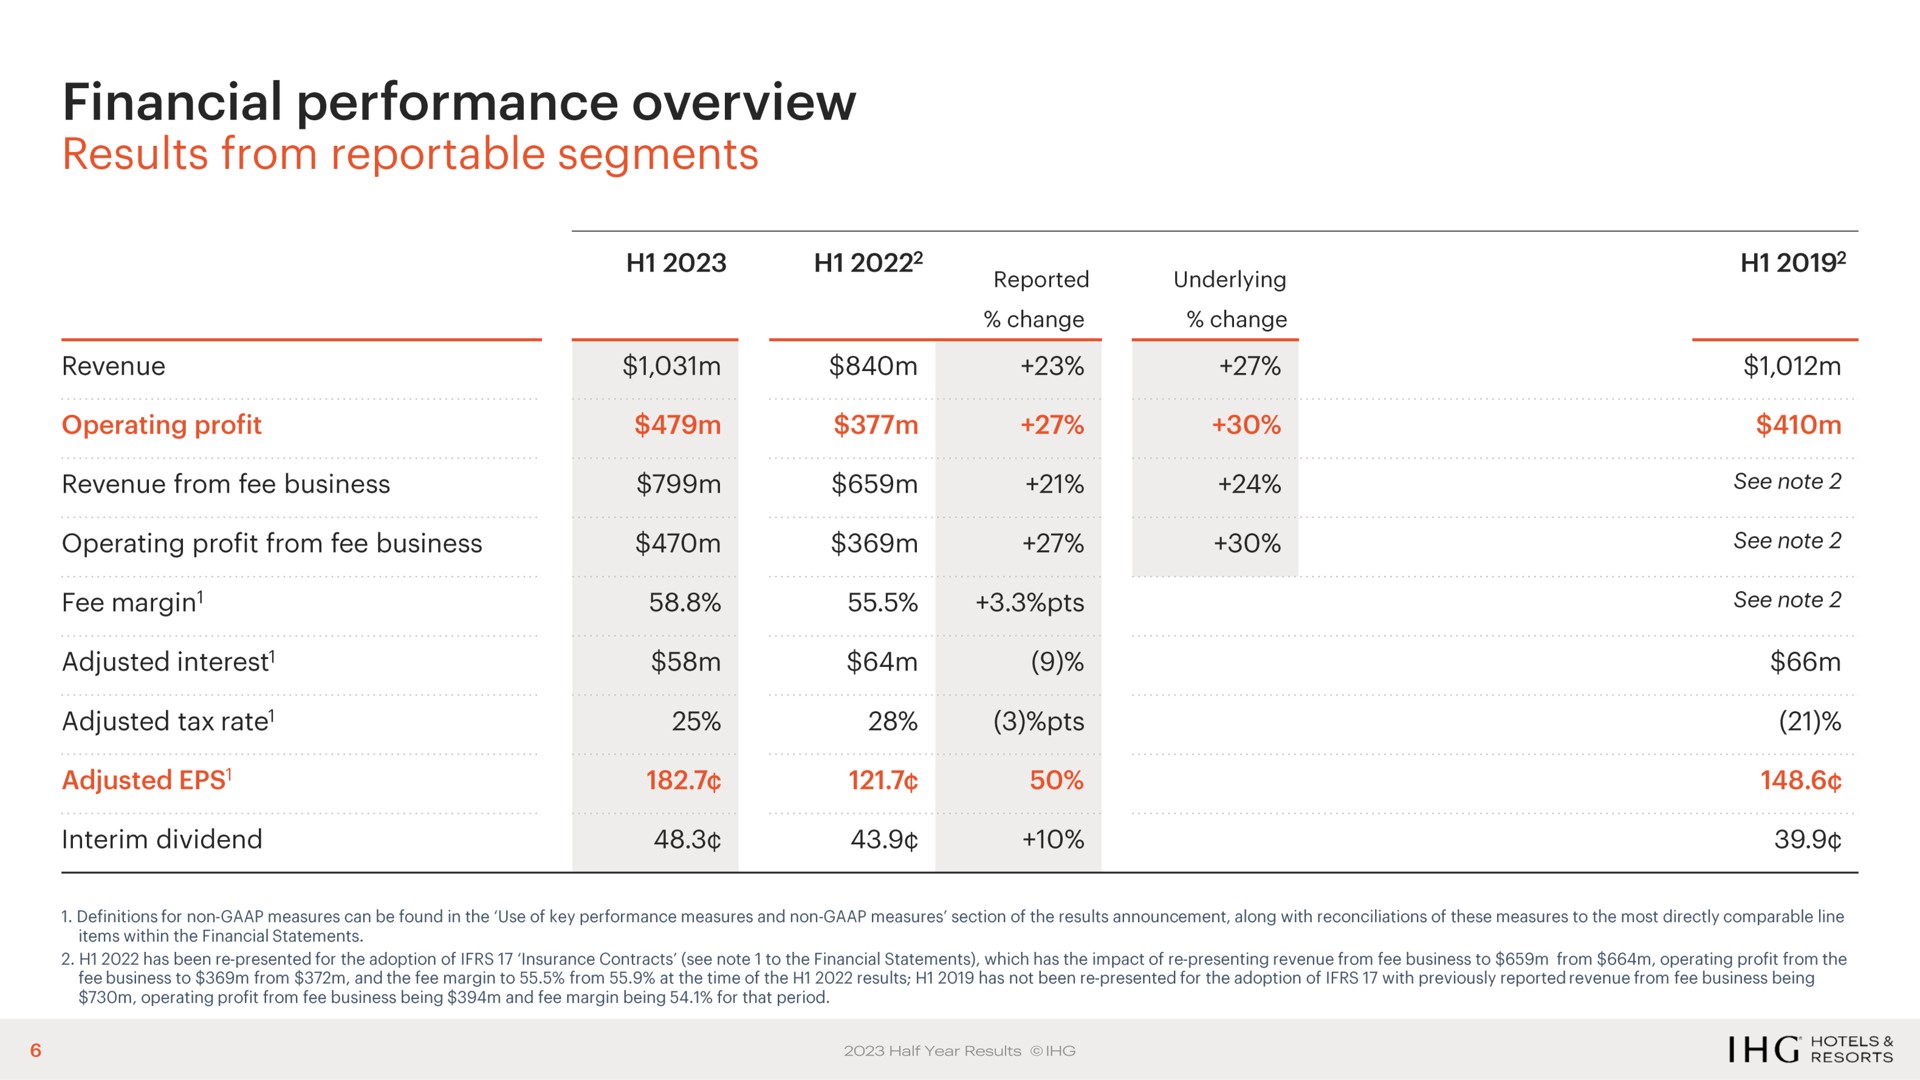 financial performance overview results from reportable segments | IHG Hotels